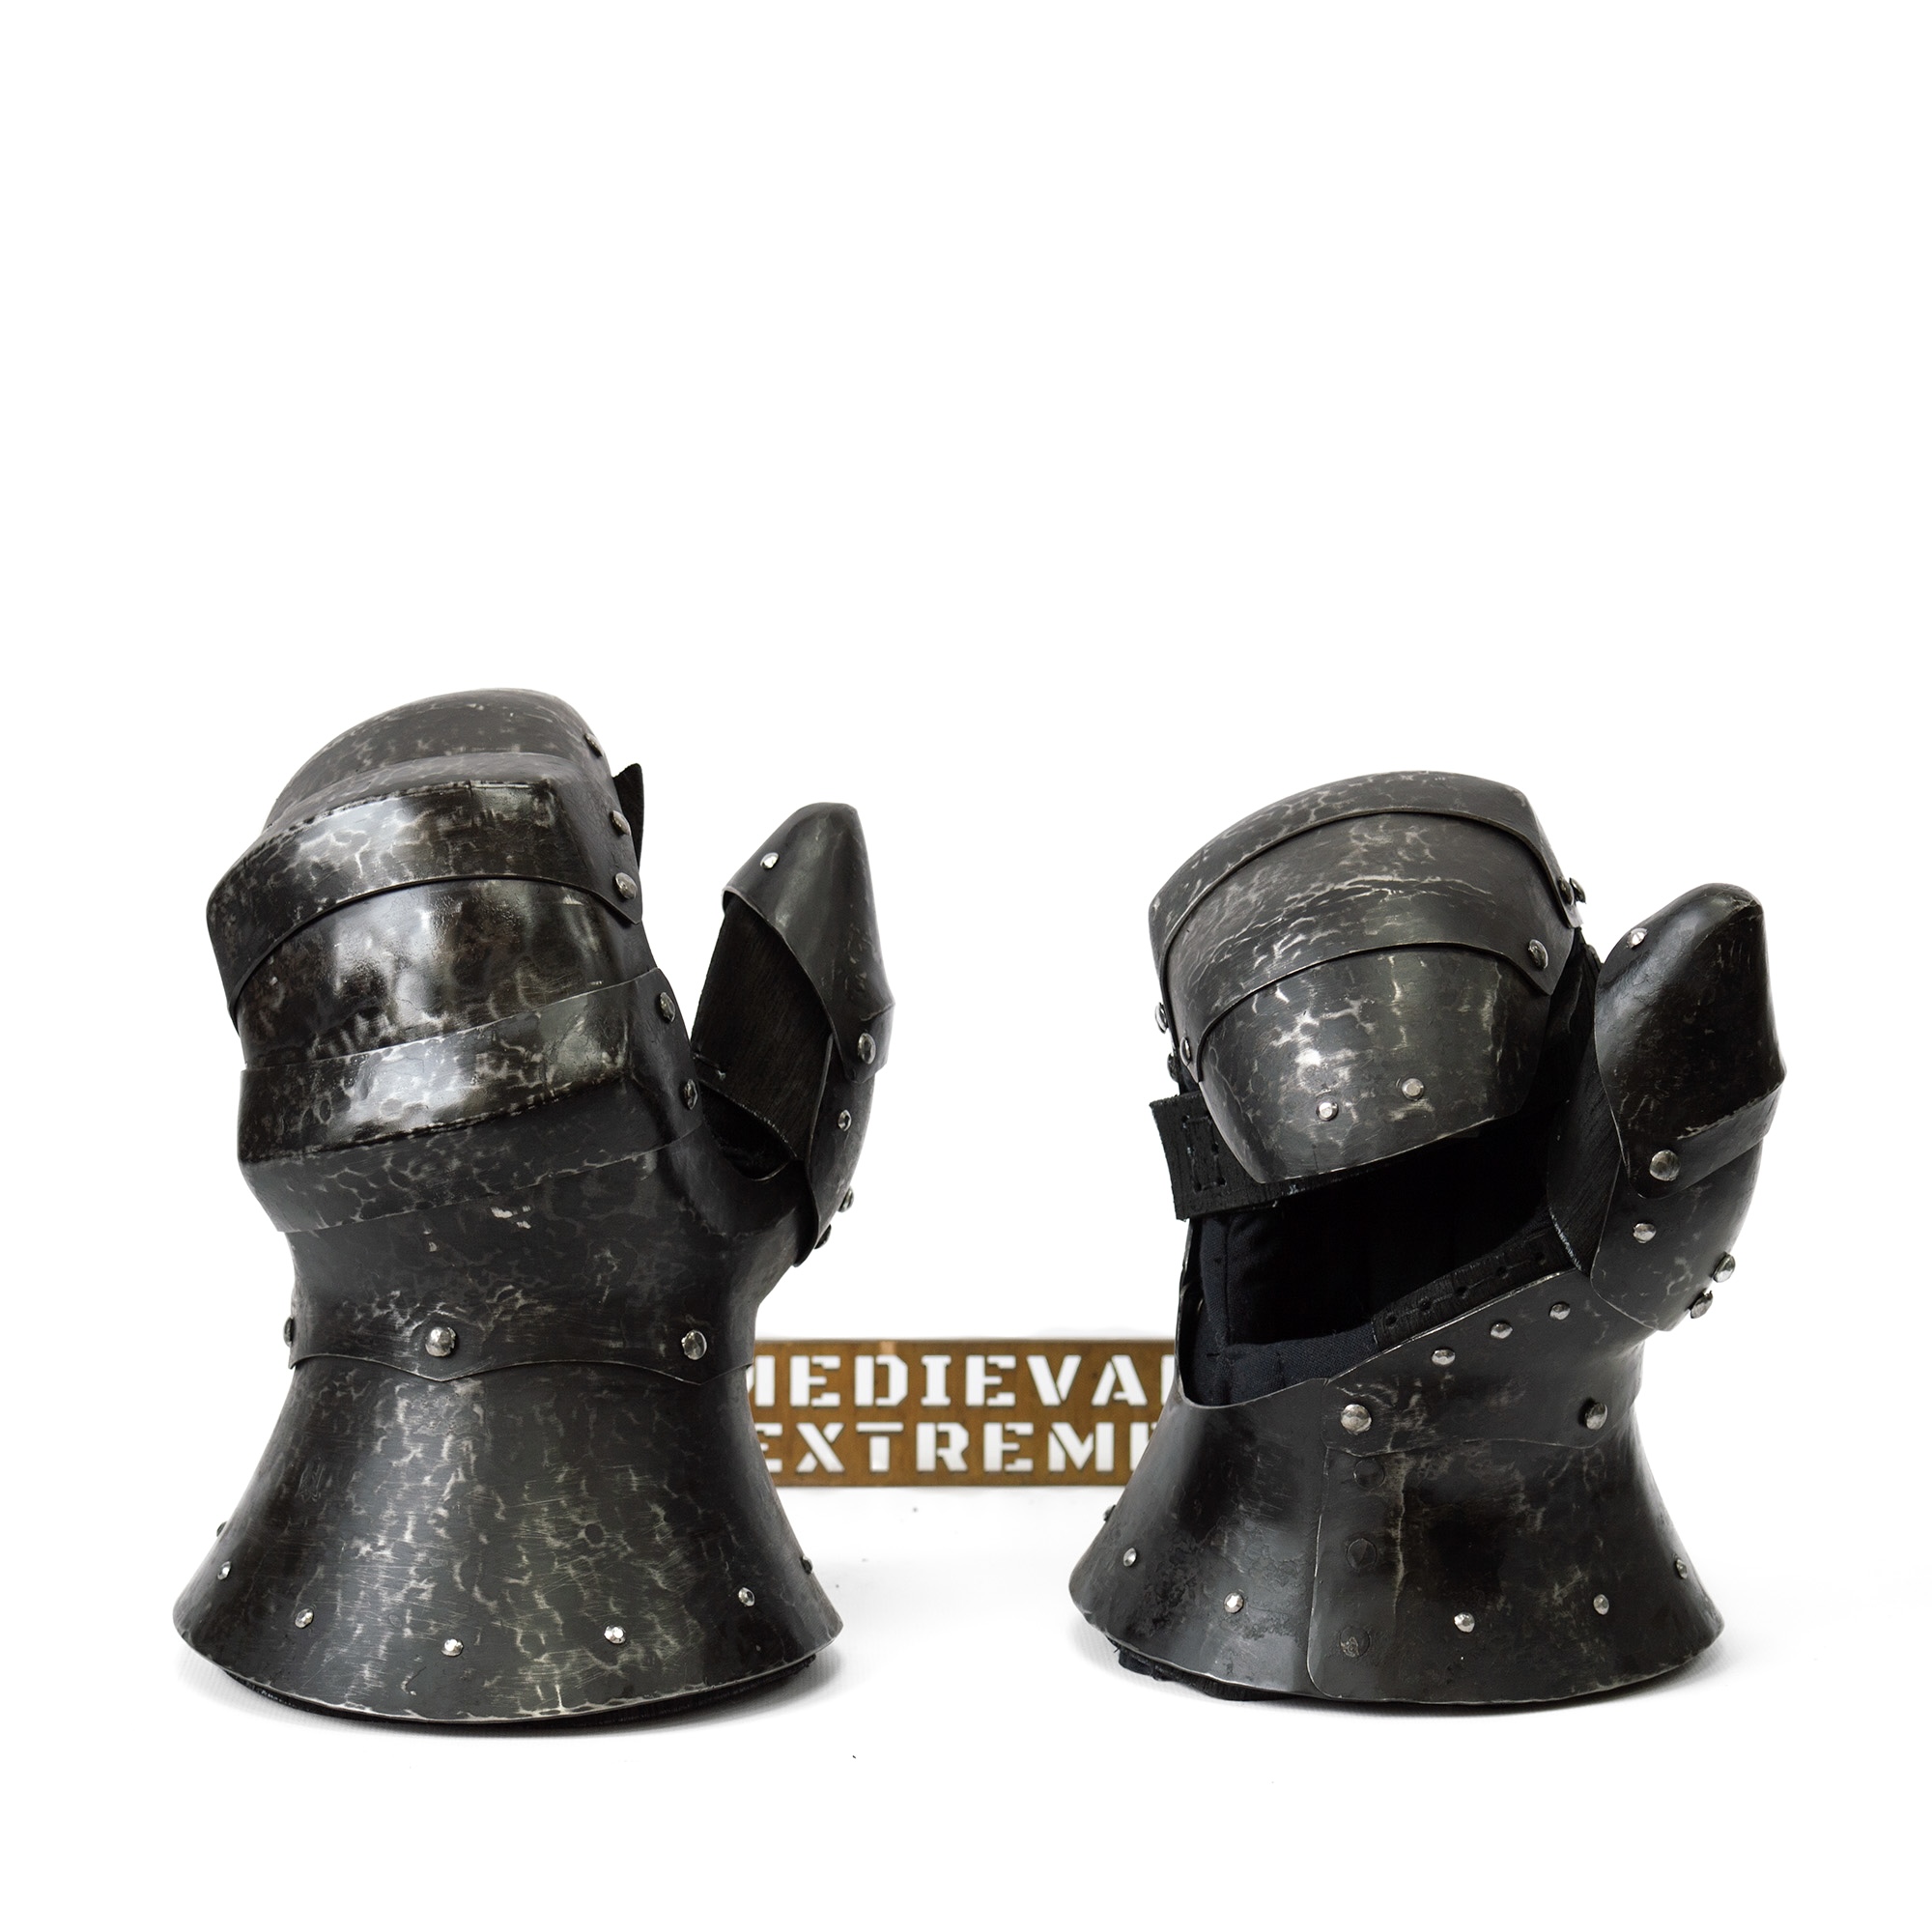 Blackened gauntlets for armored combat pair